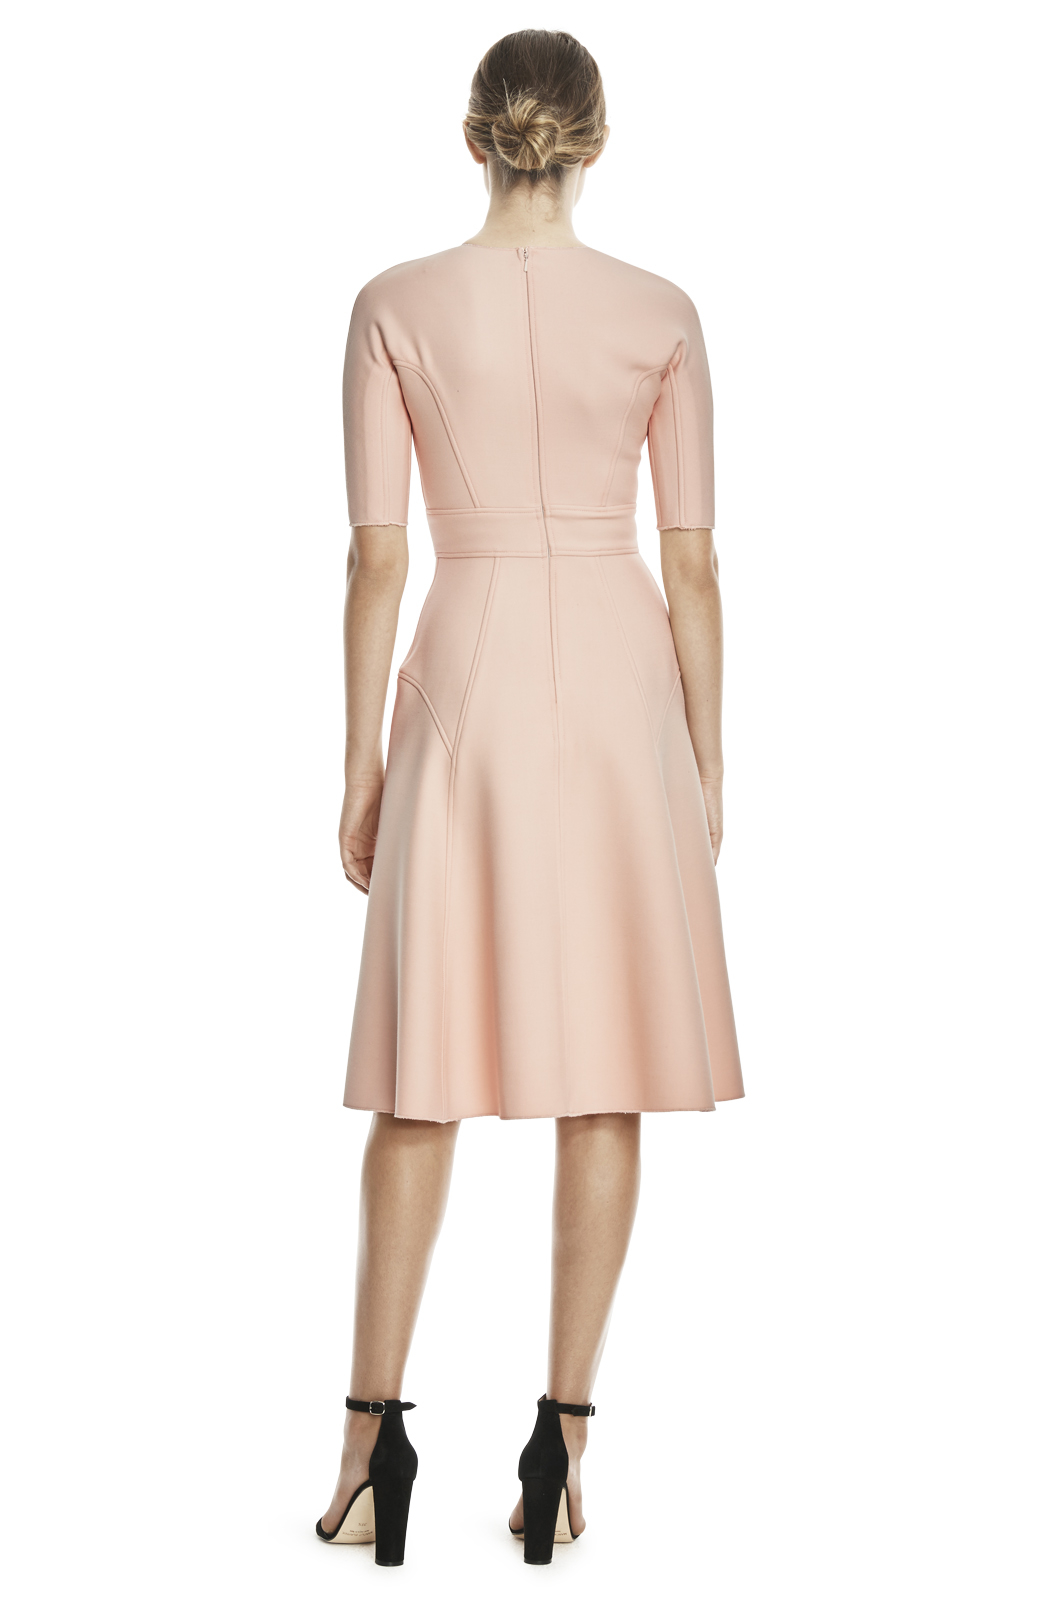 lela-rose-blush-double-faced-twill-cap-sleeve-dress-pink-product-0-239696493-normal.jpeg